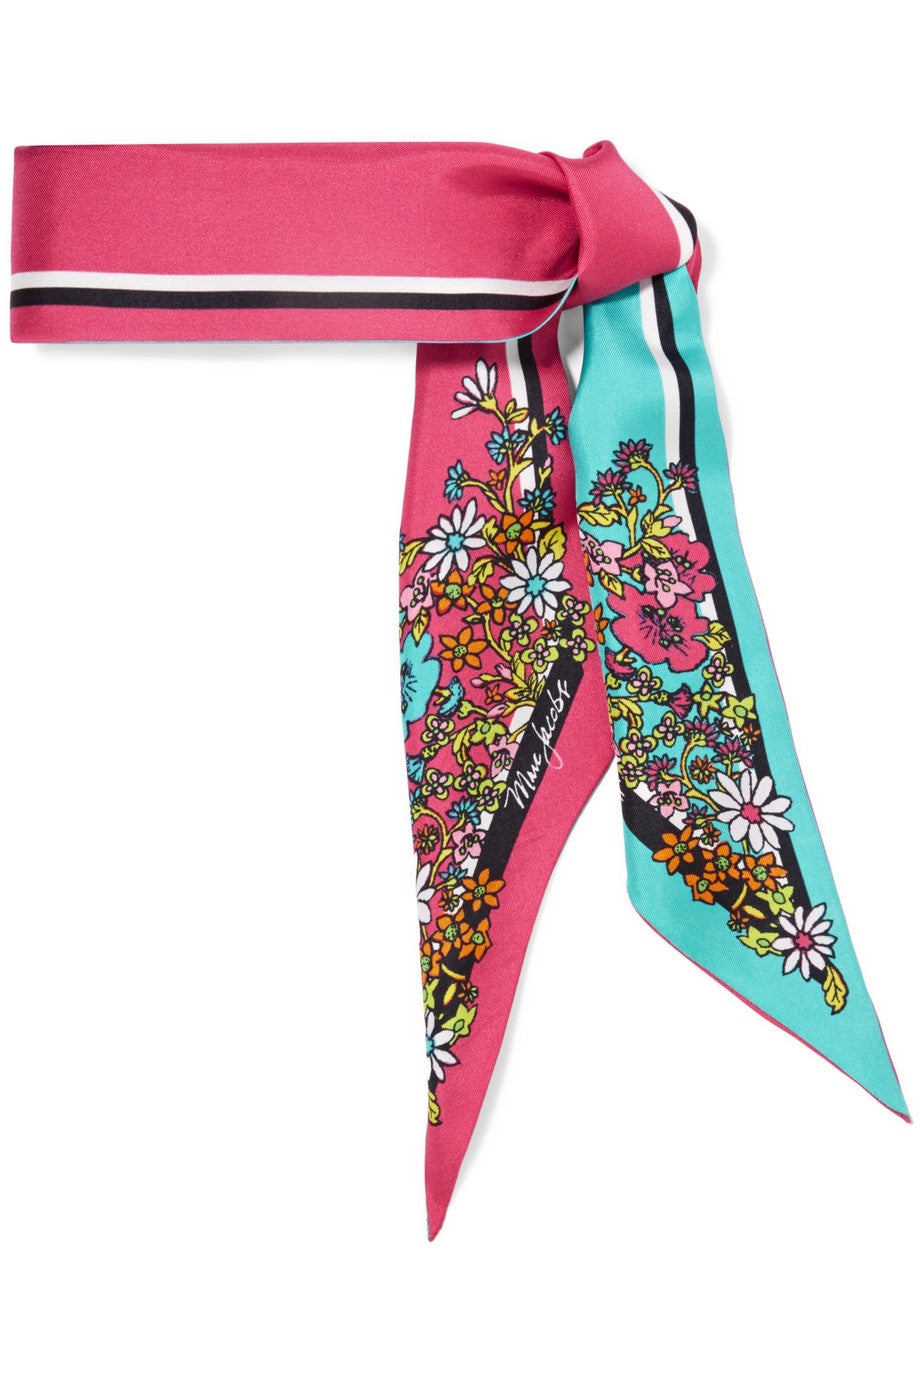 The Prettiest Silk Scarves To Tie Over Your Hair